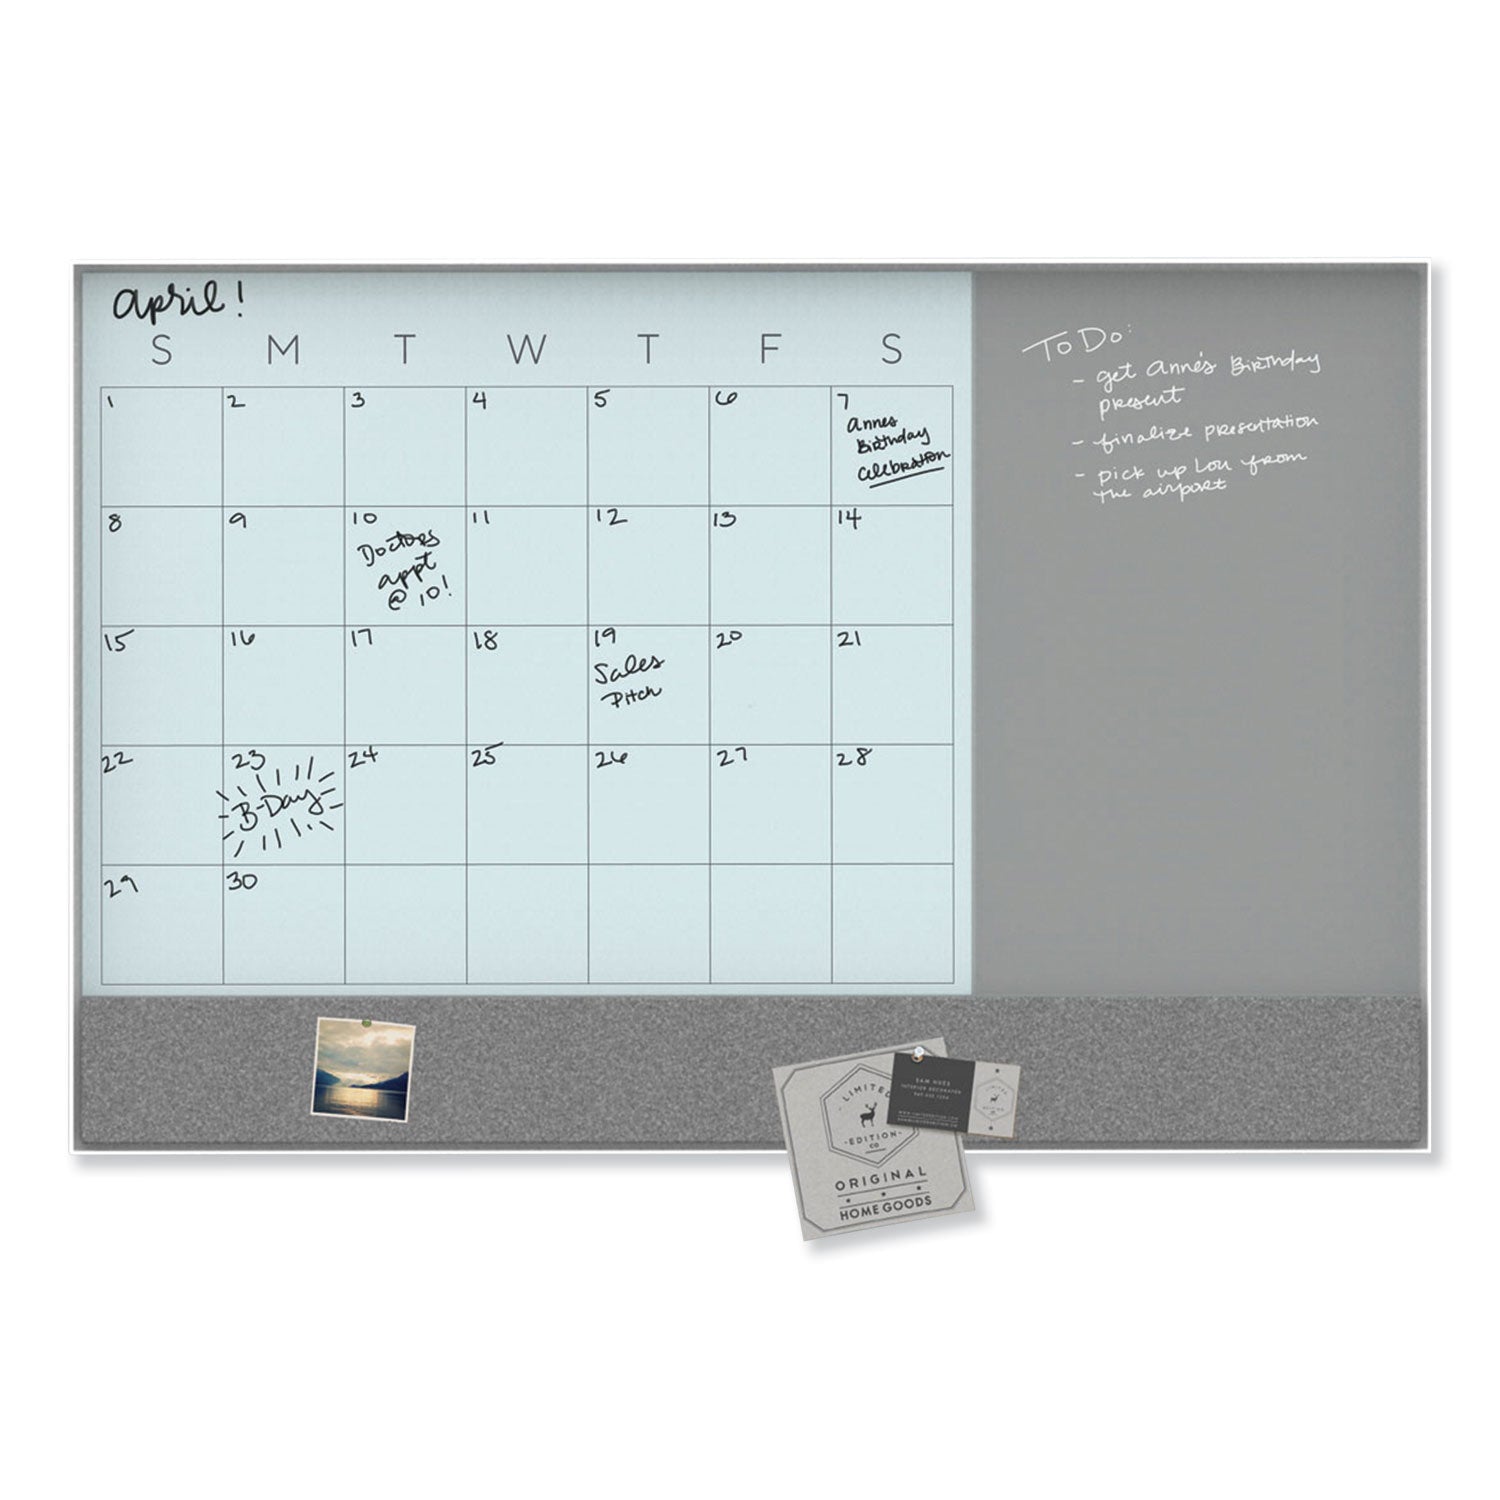 3n1-magnetic-glass-dry-erase-combo-board-47-x-35-month-view-gray-white-surface-white-aluminum-frame_ubr3198u0001 - 3